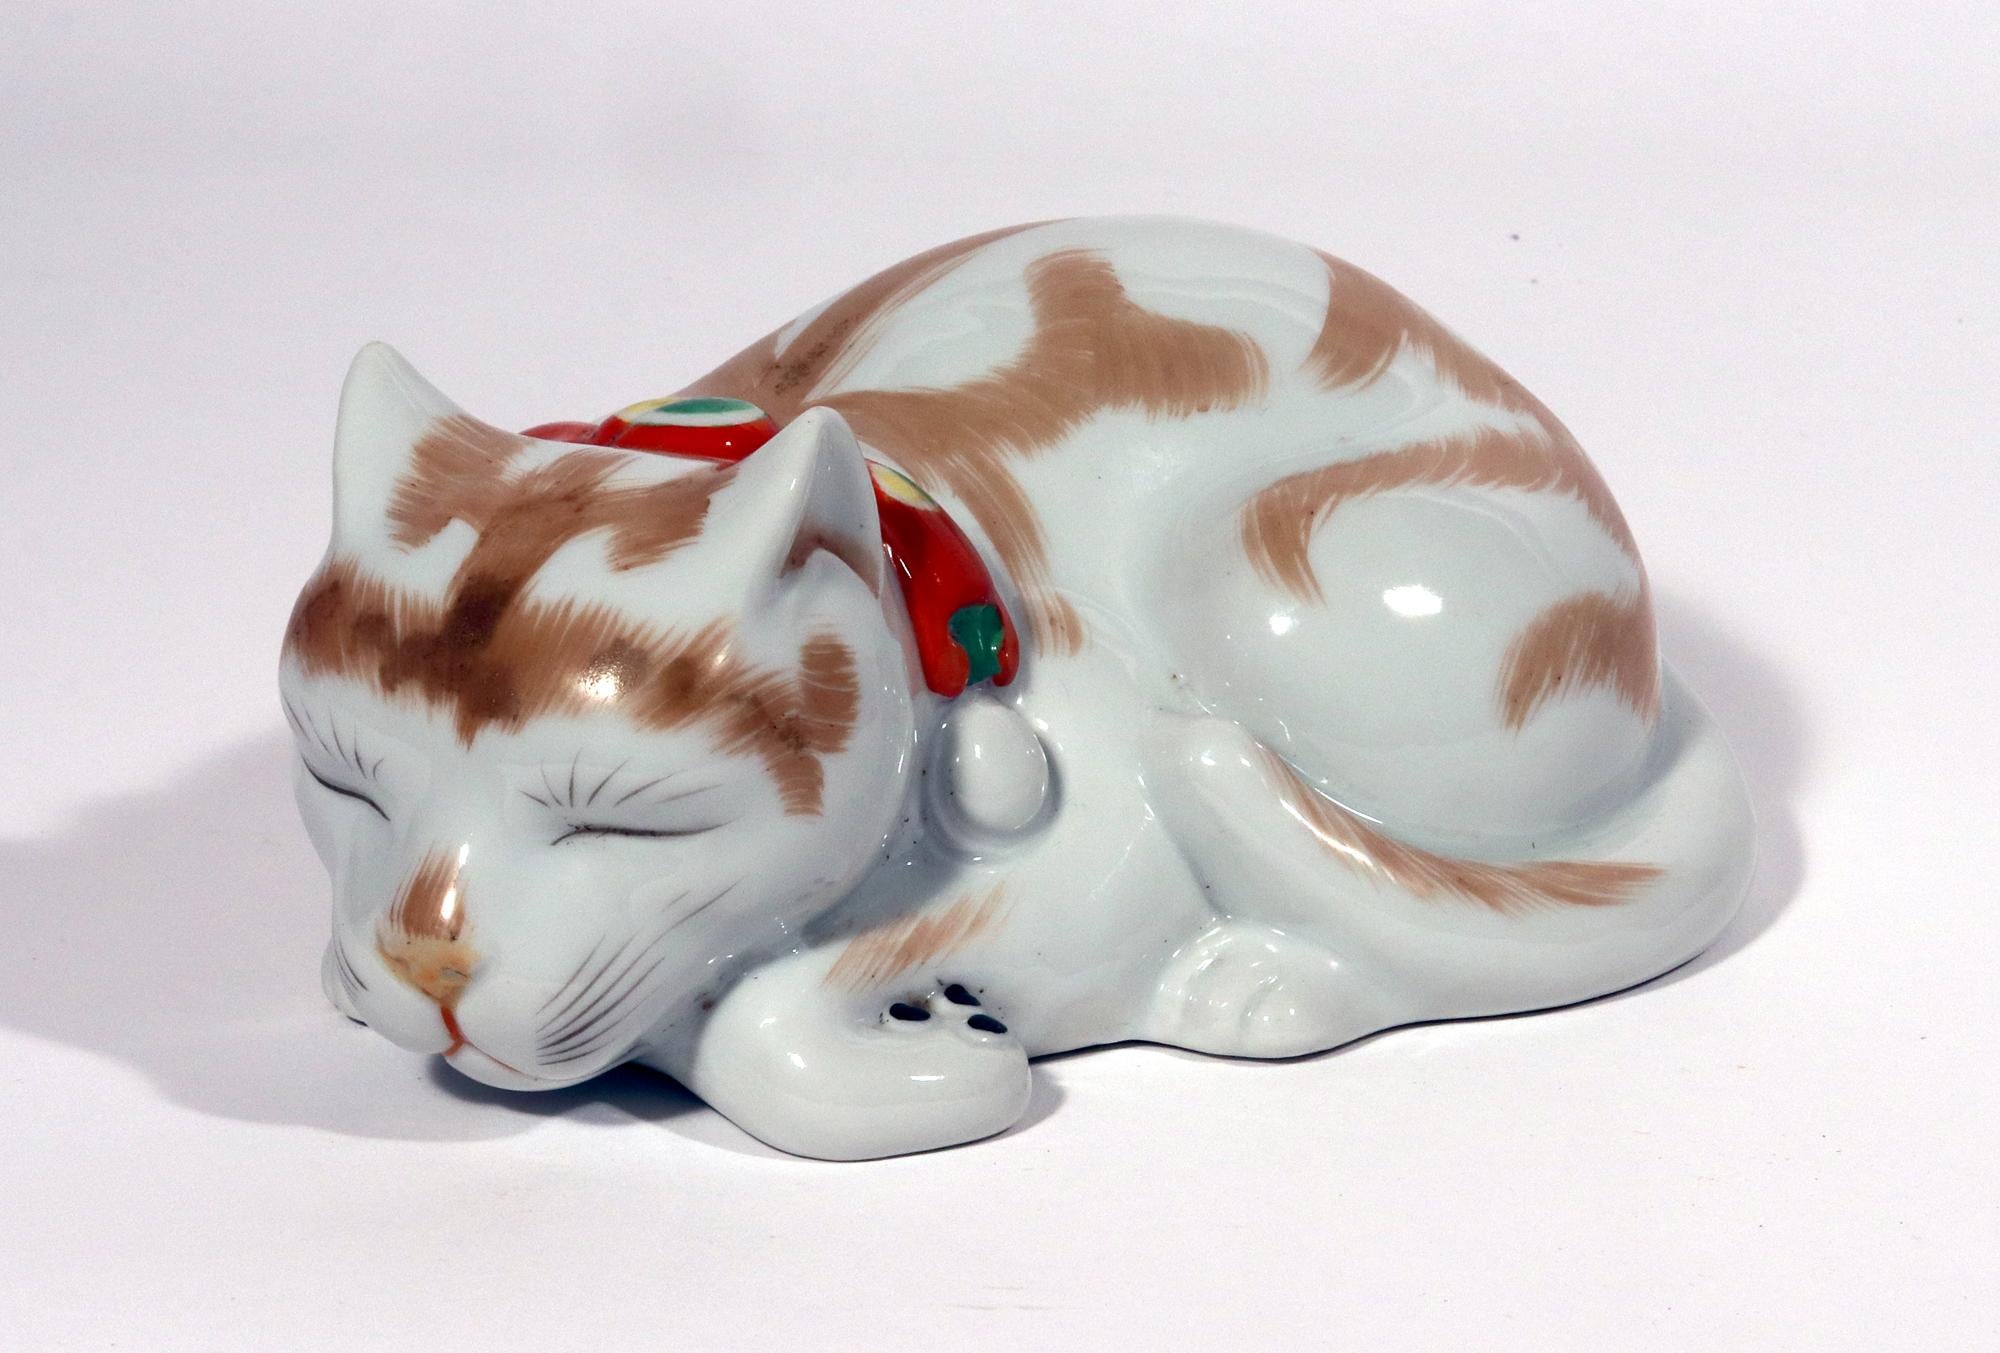 Japanese Kutani Porcelain Sleeping Cat Figure,
Meiji Period,
Circa 1910-20

The porcelain model of a cat depicts a cat naturalistically modeled with its paws beneath it and it tail folded over its hind quarters.  Around its neck is an orange collar